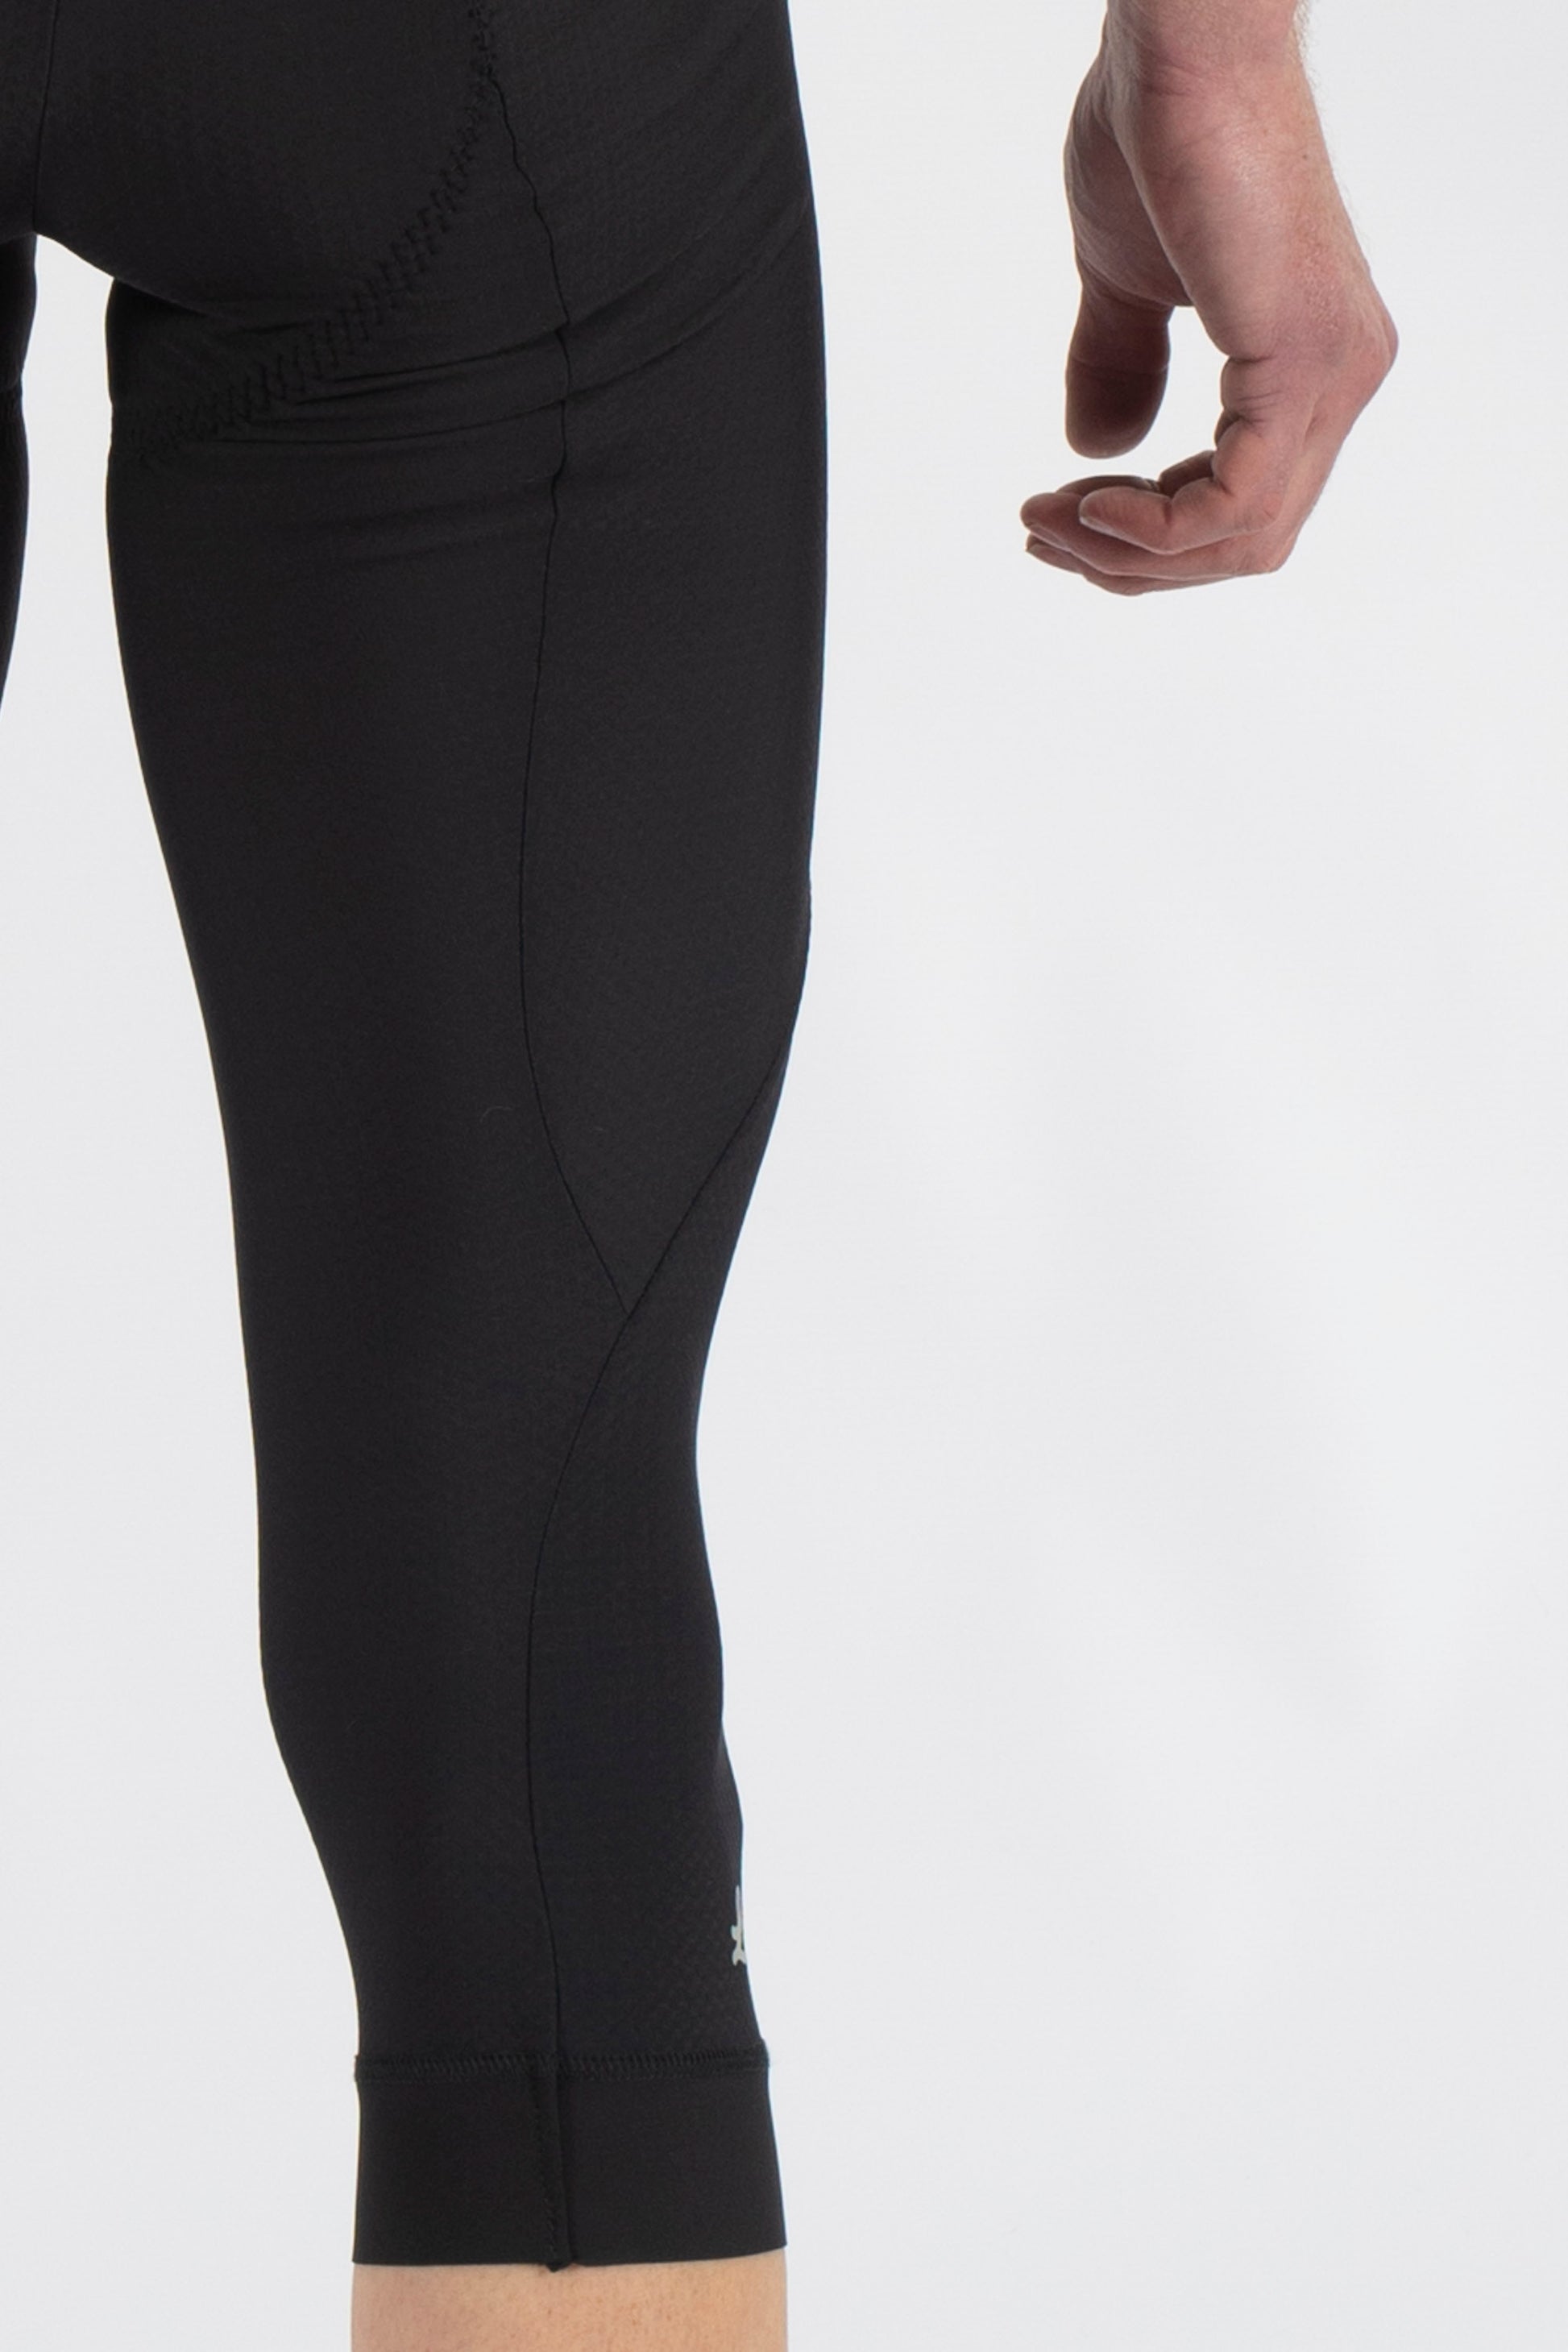 Thermal 3/4 Bibtights - Lusso Cycle Wear